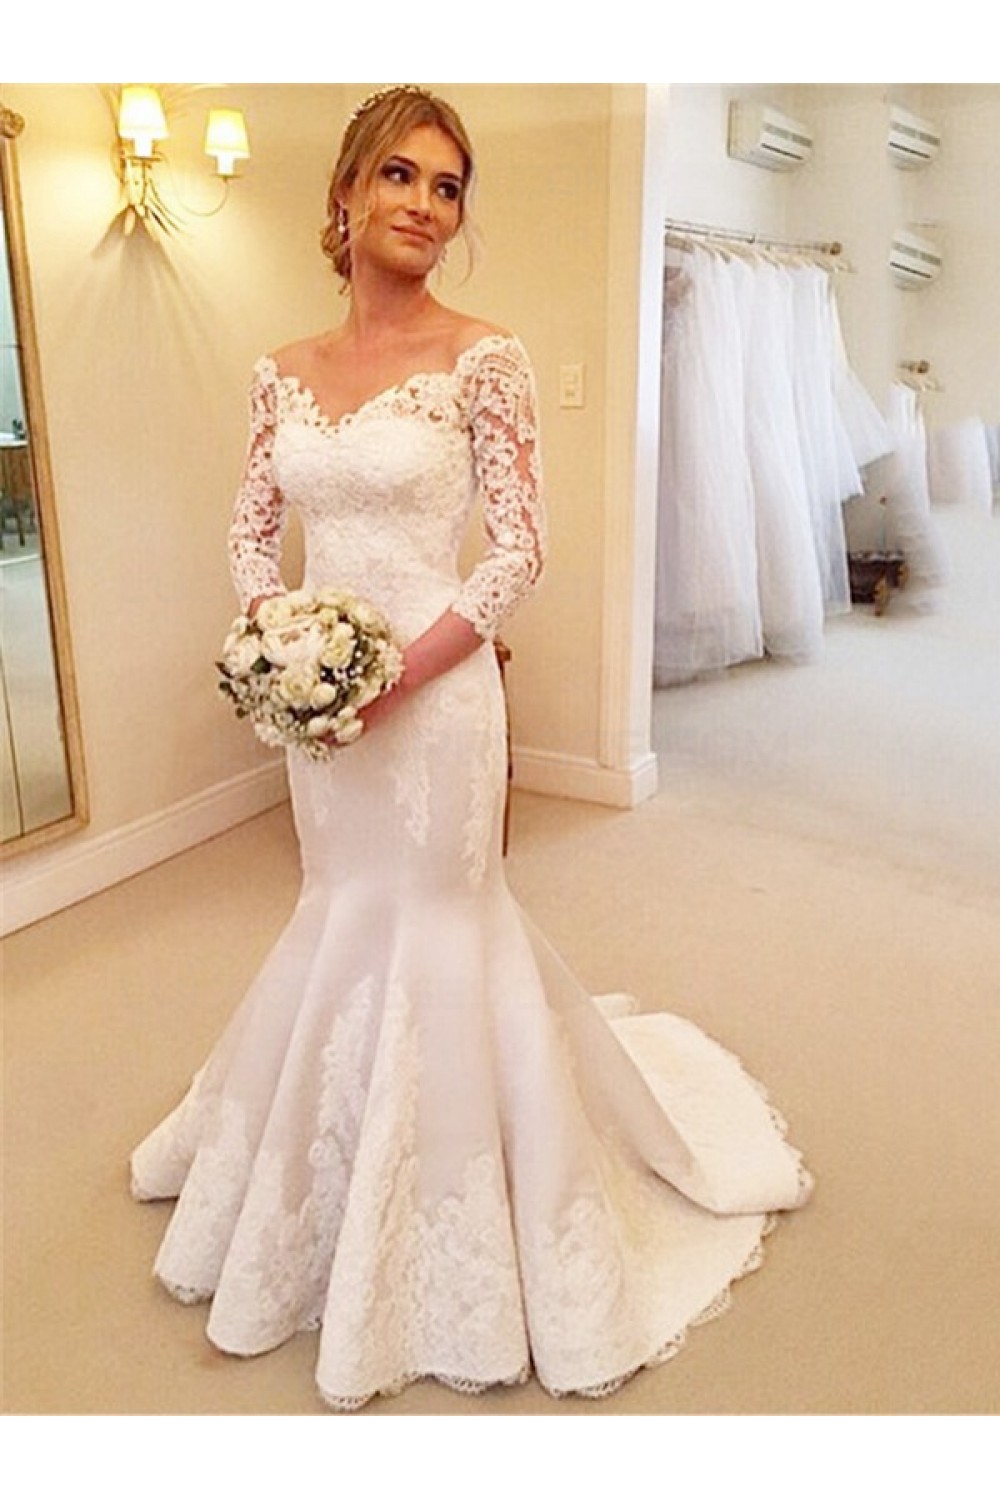  Lace 3 4 Sleeve Wedding Dress in the world Check it out now 